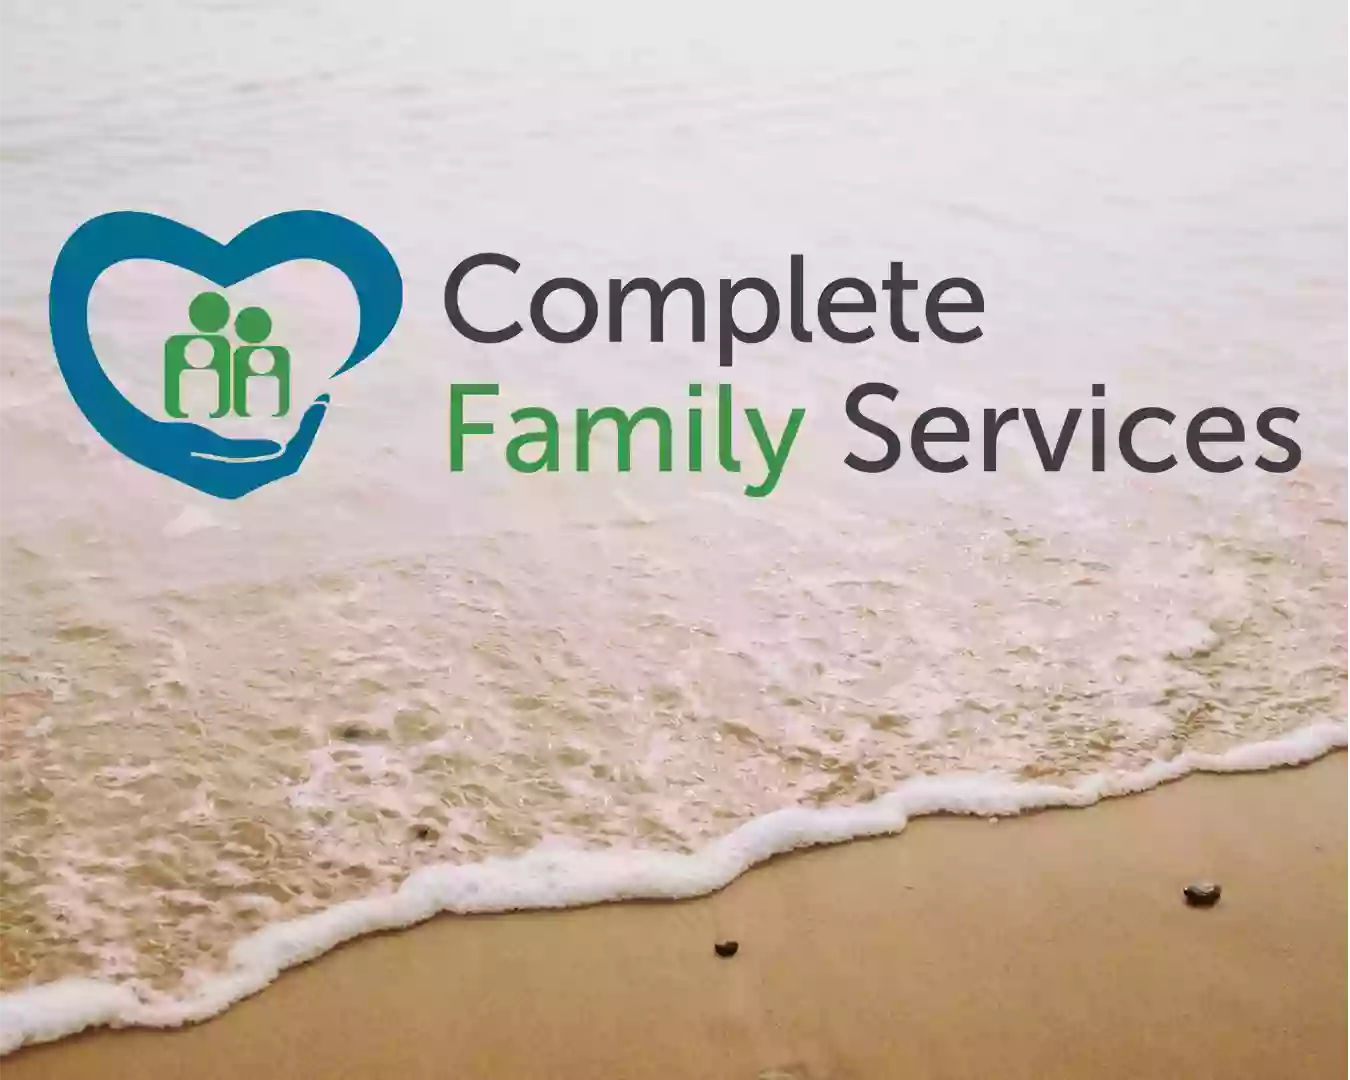 Complete Family Services